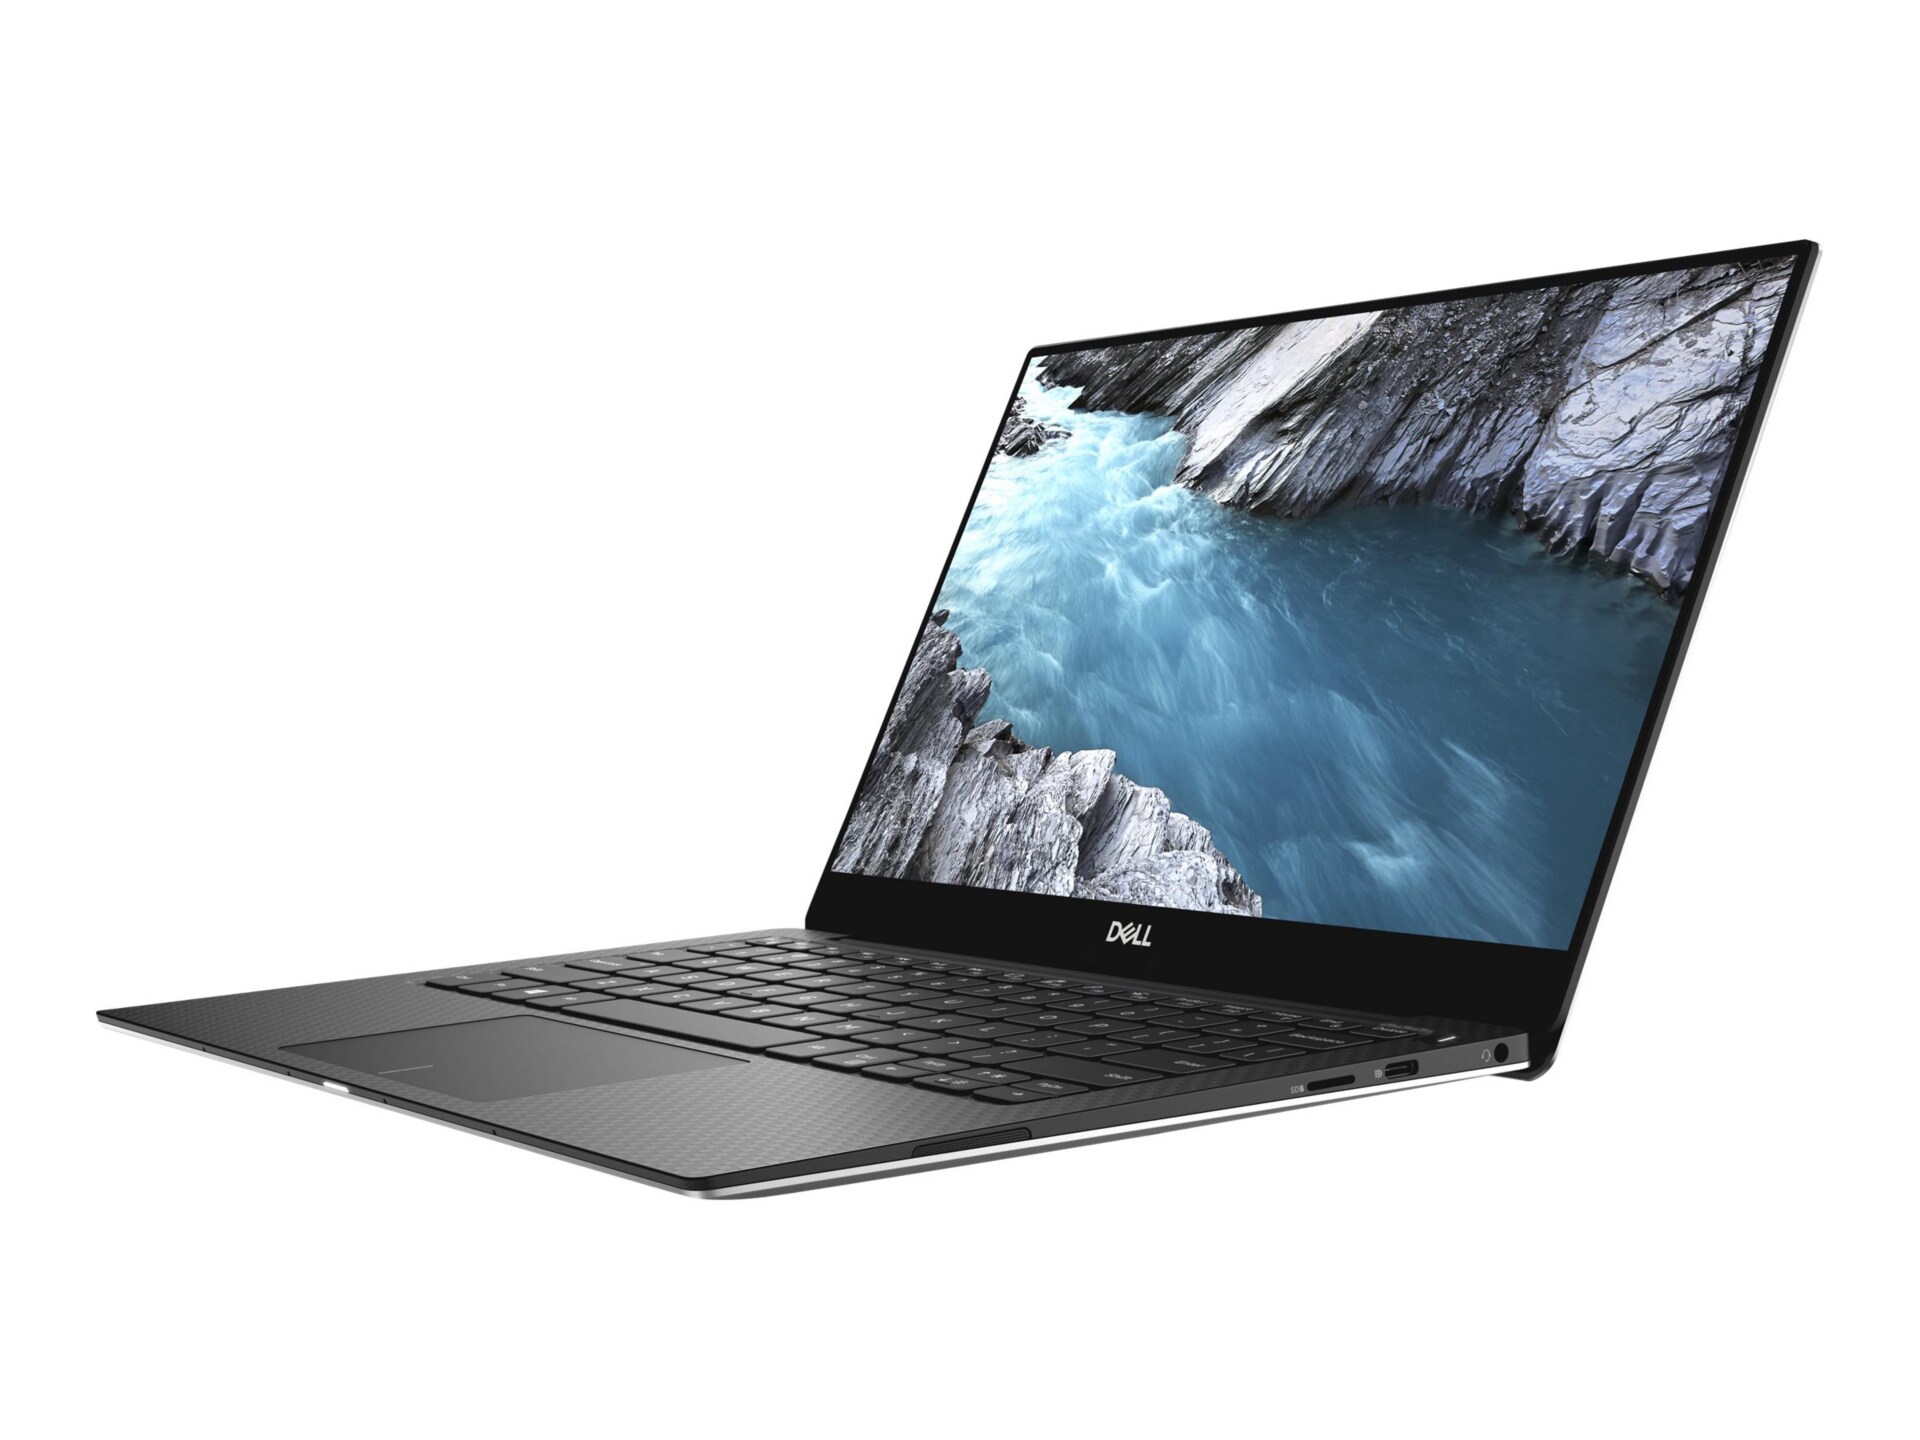 Dell XPS 13 9370 - 13.3" - Core i5 8250U - 8 GB RAM - 128 GB SSD - with 1-year ProSupport